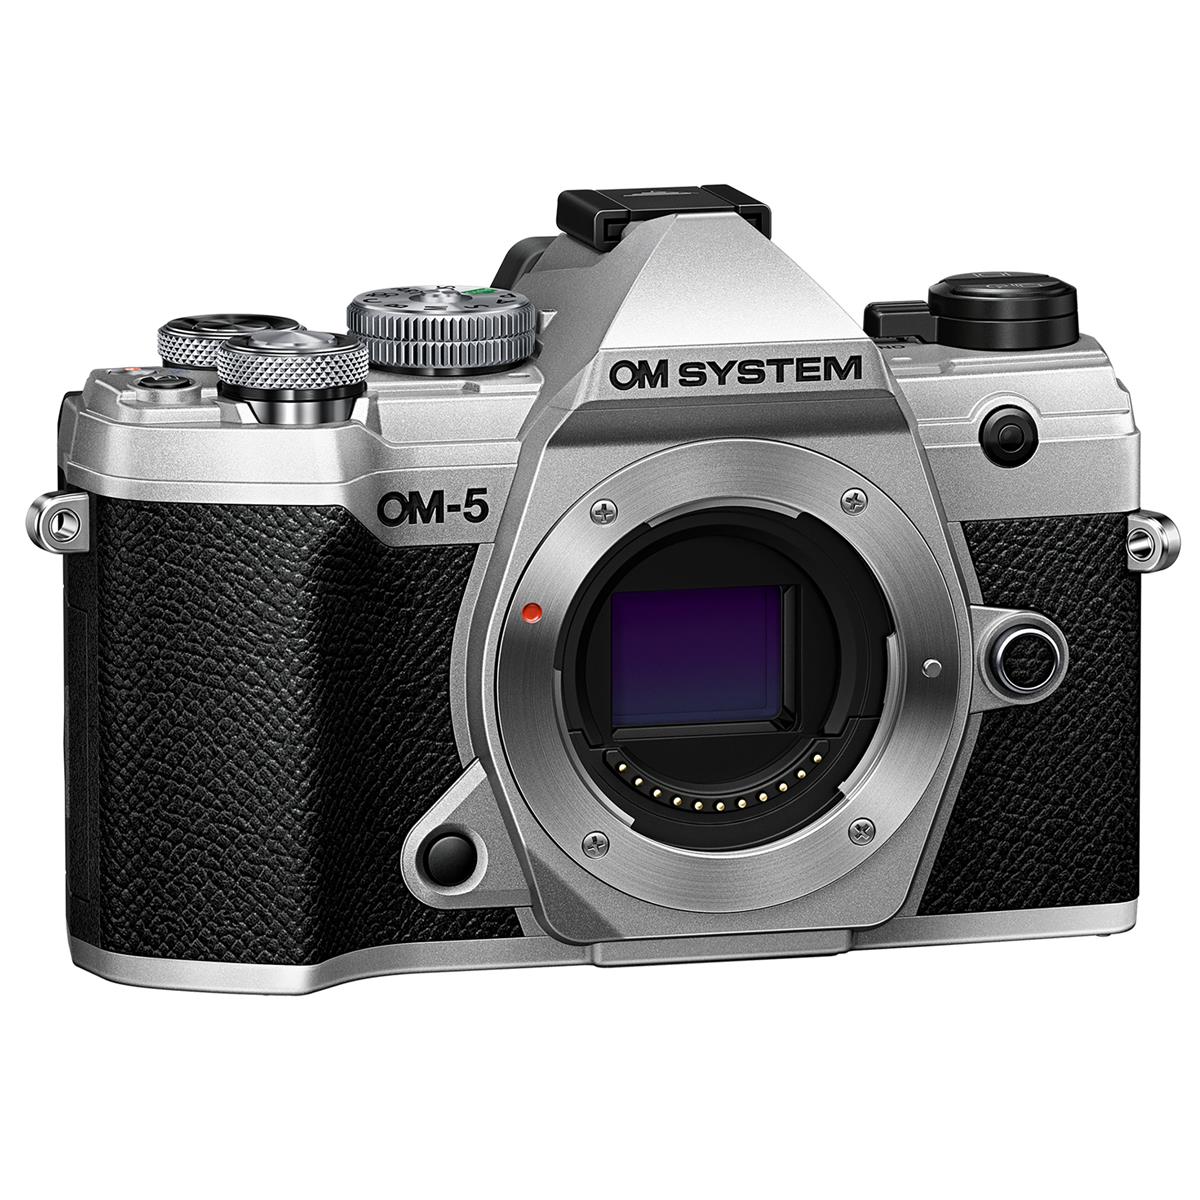 OM System OM-5 launches as adventure-ready compact MFT camera